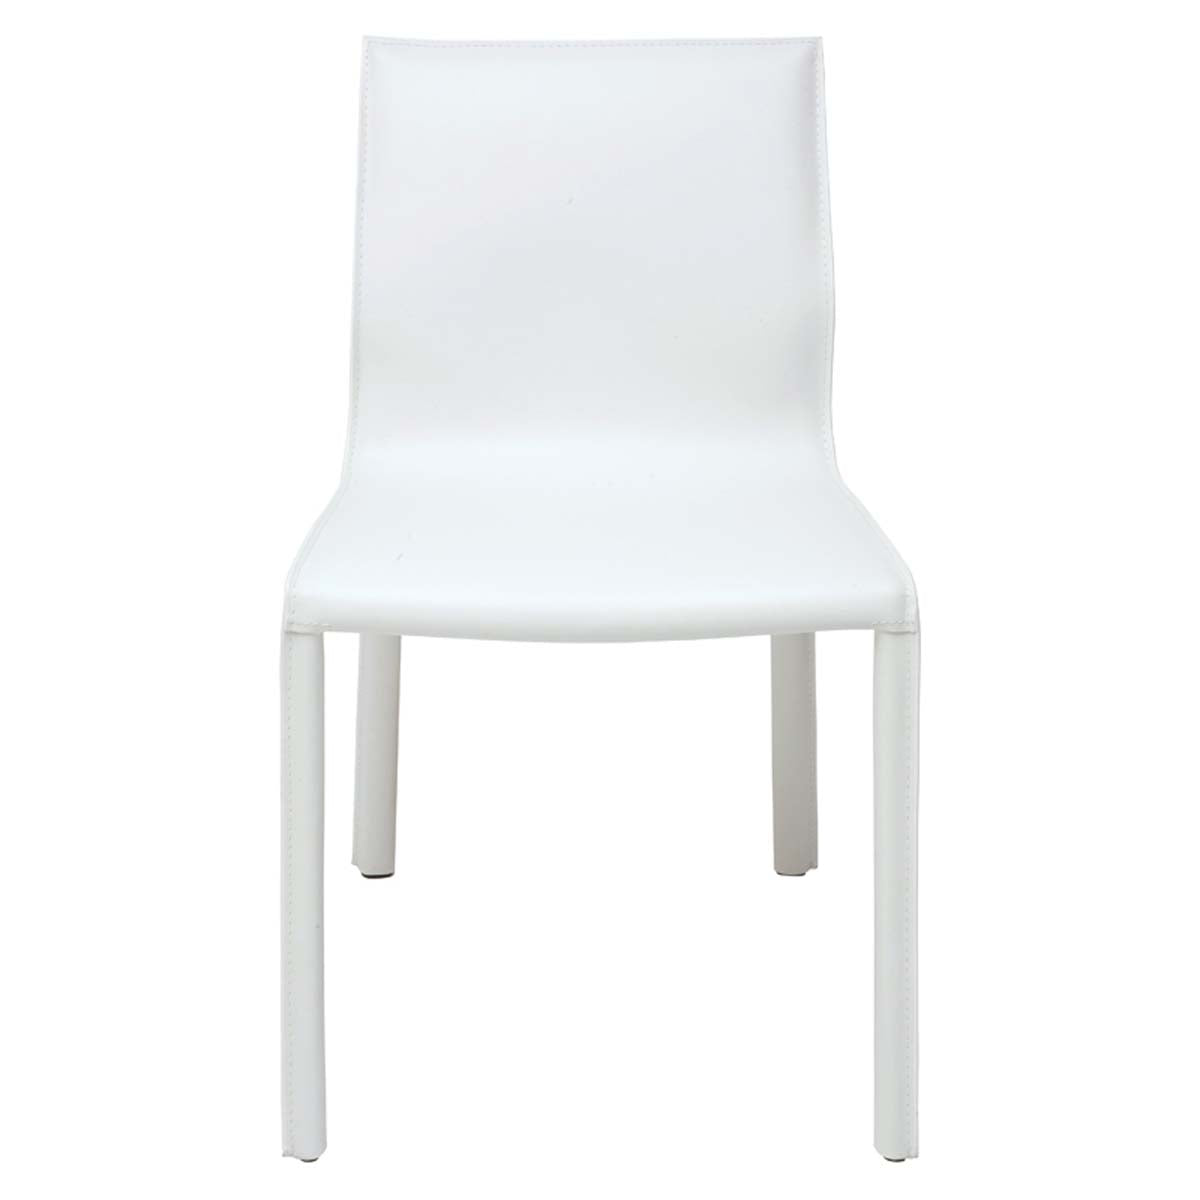 Nuevo Colter Leather Armless Dining Chair - White